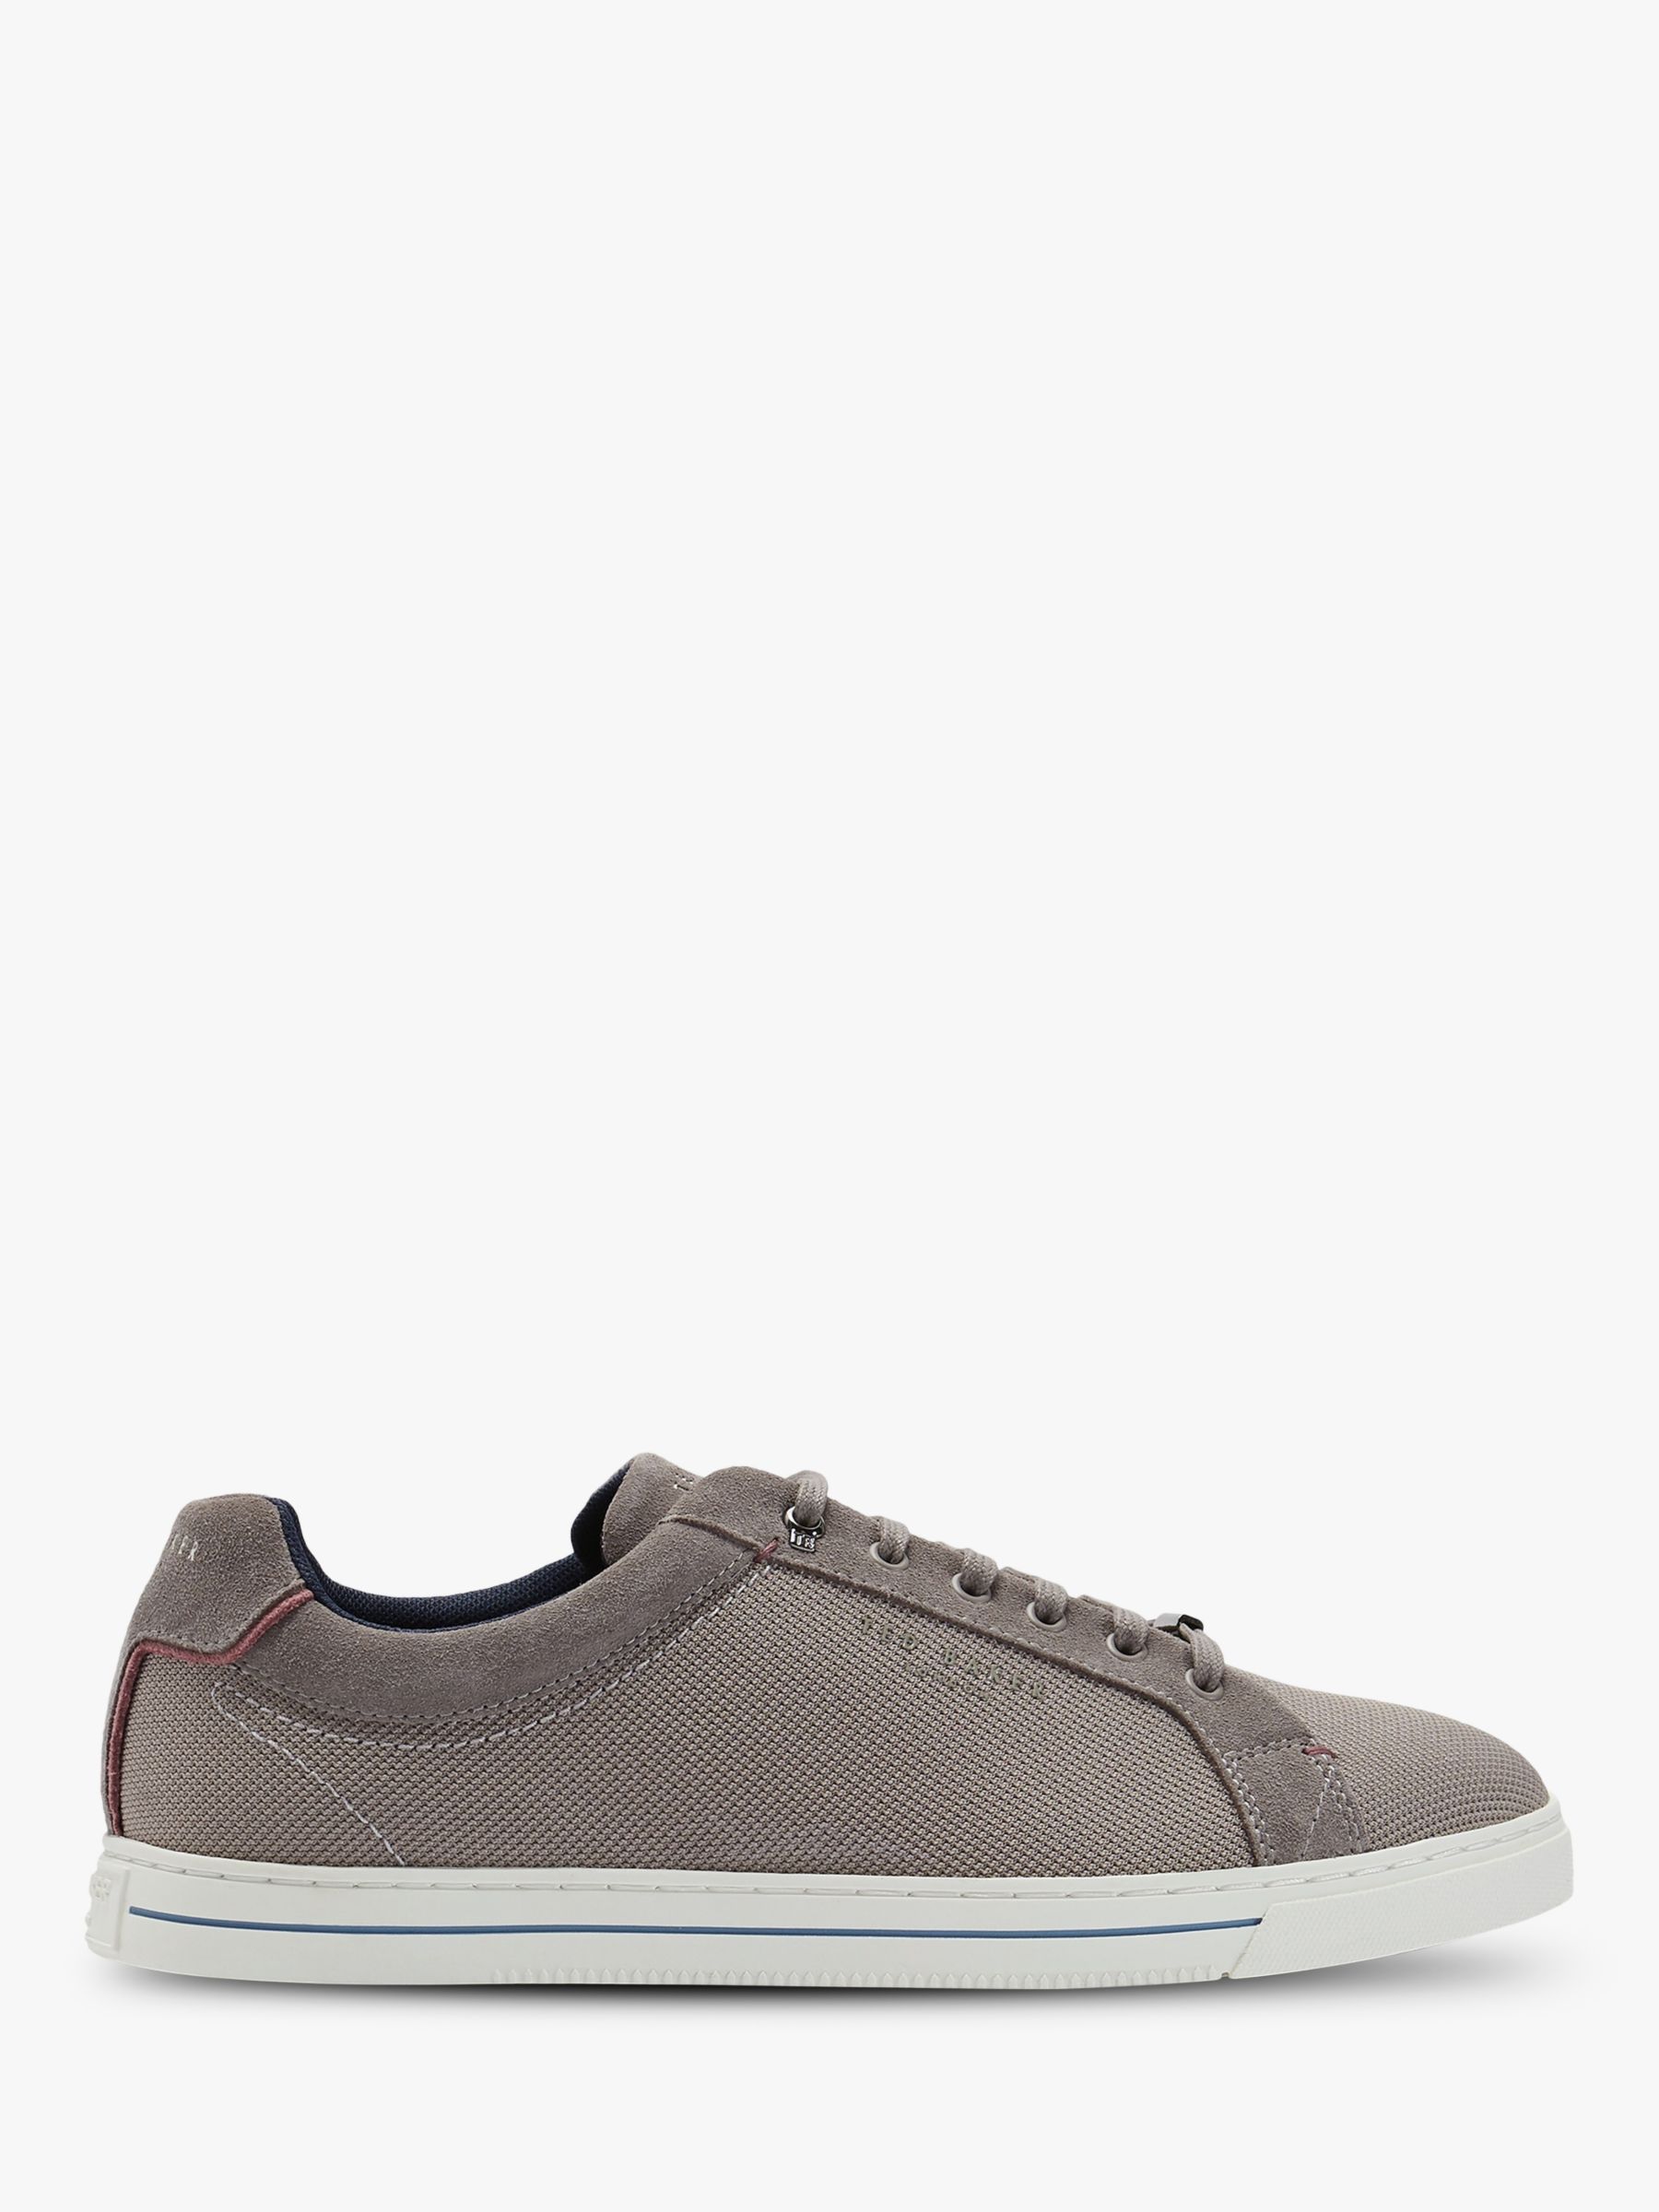 Ted Baker Ashwyns Suede Trainers